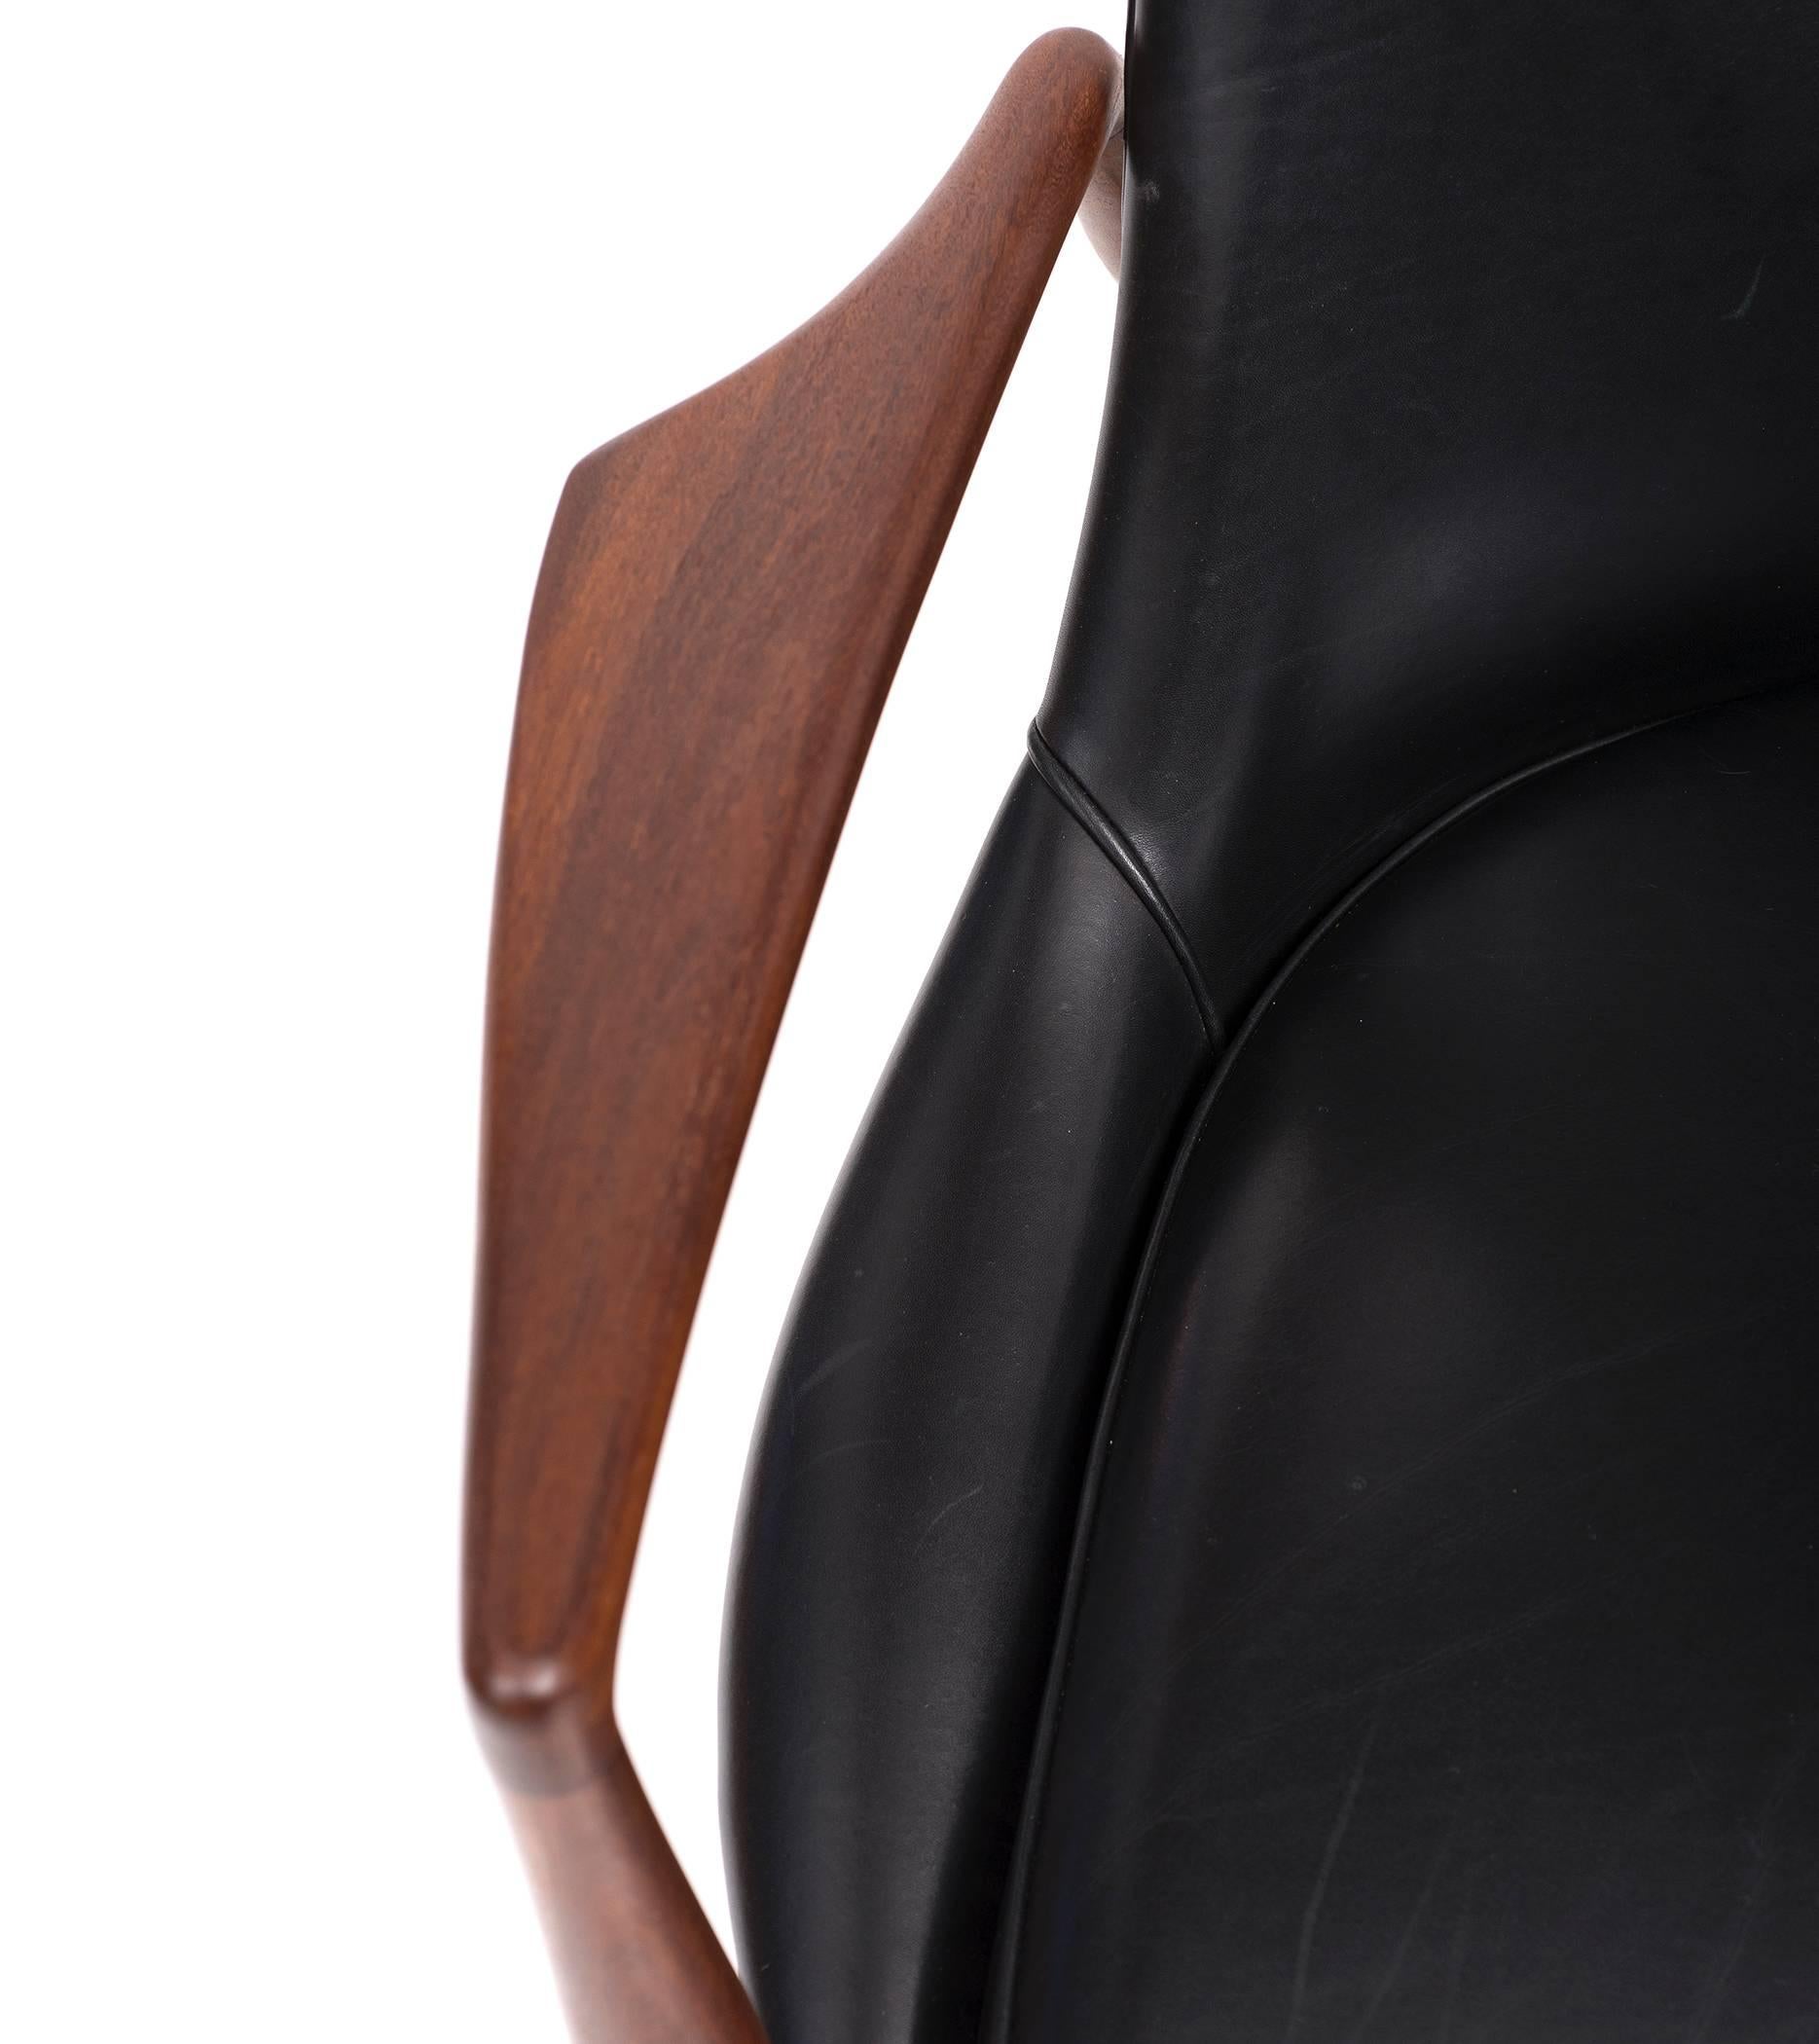 Mid-20th Century Ib Kofod-Larsen High Back Seal Chair in Teak and Black Leather for OPE, 1960s For Sale